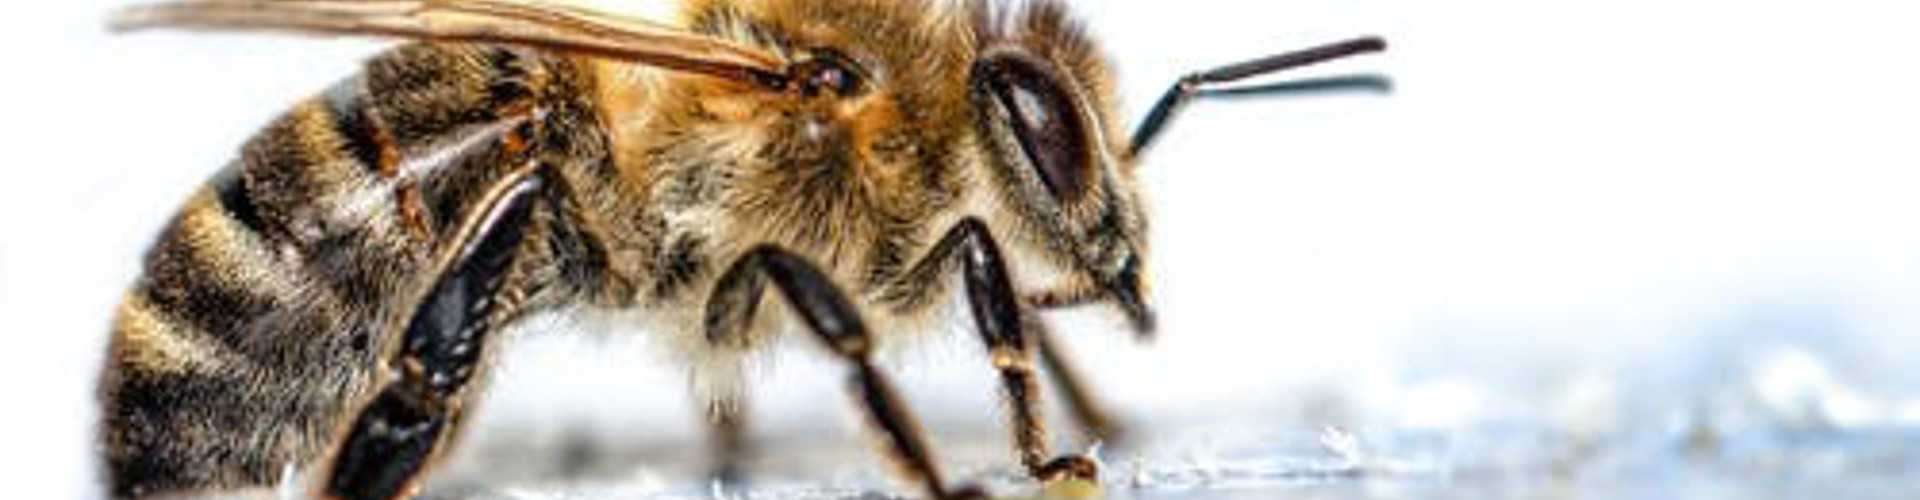 Bee in close-up